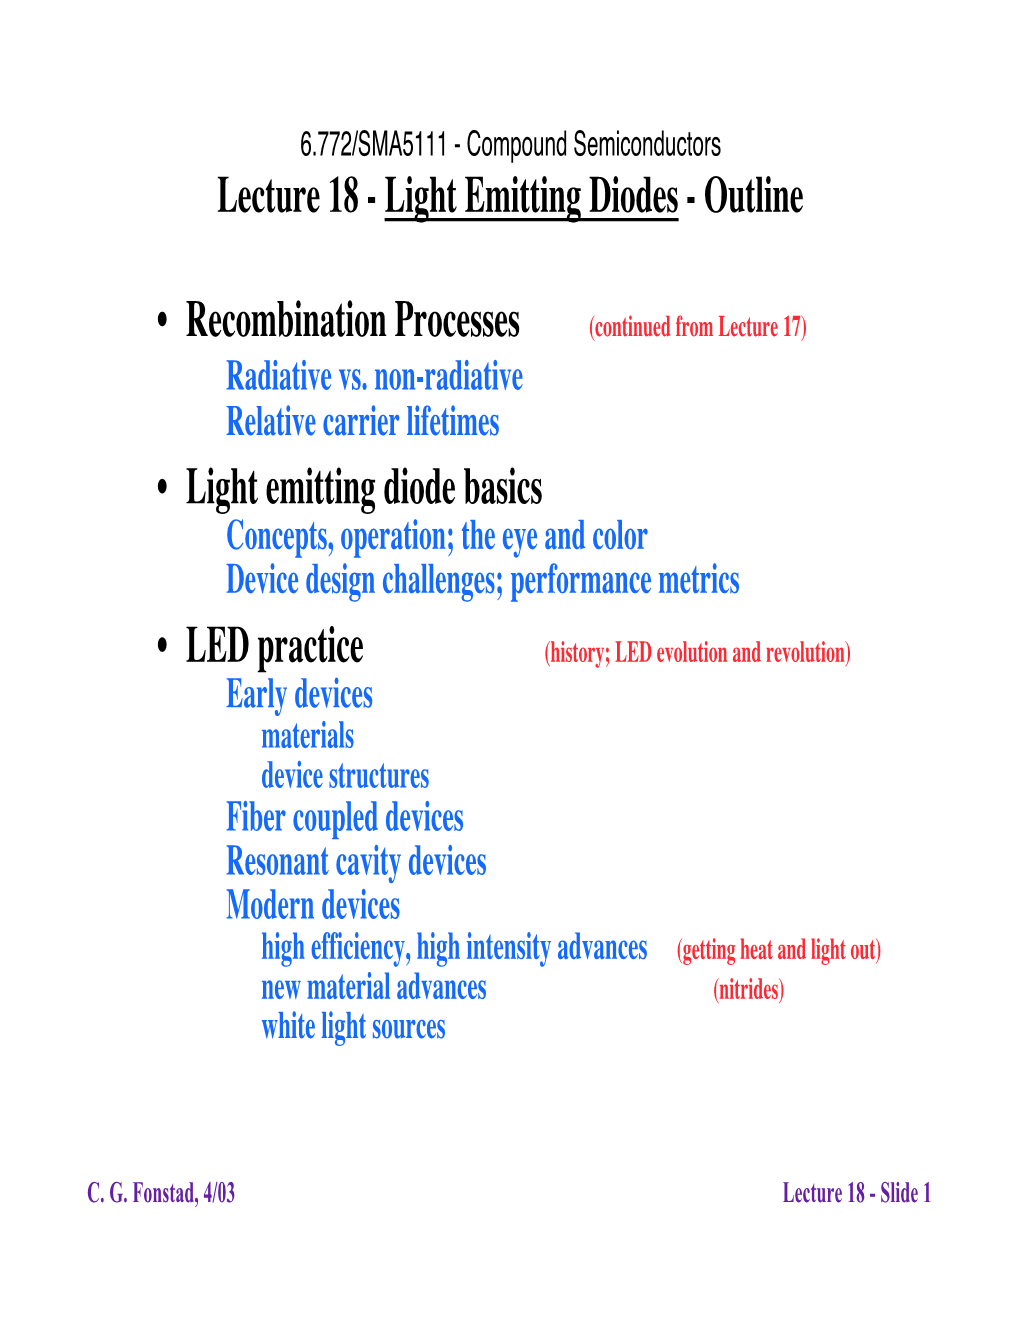 Lecture 18 - Light Emitting Diodes - Outline